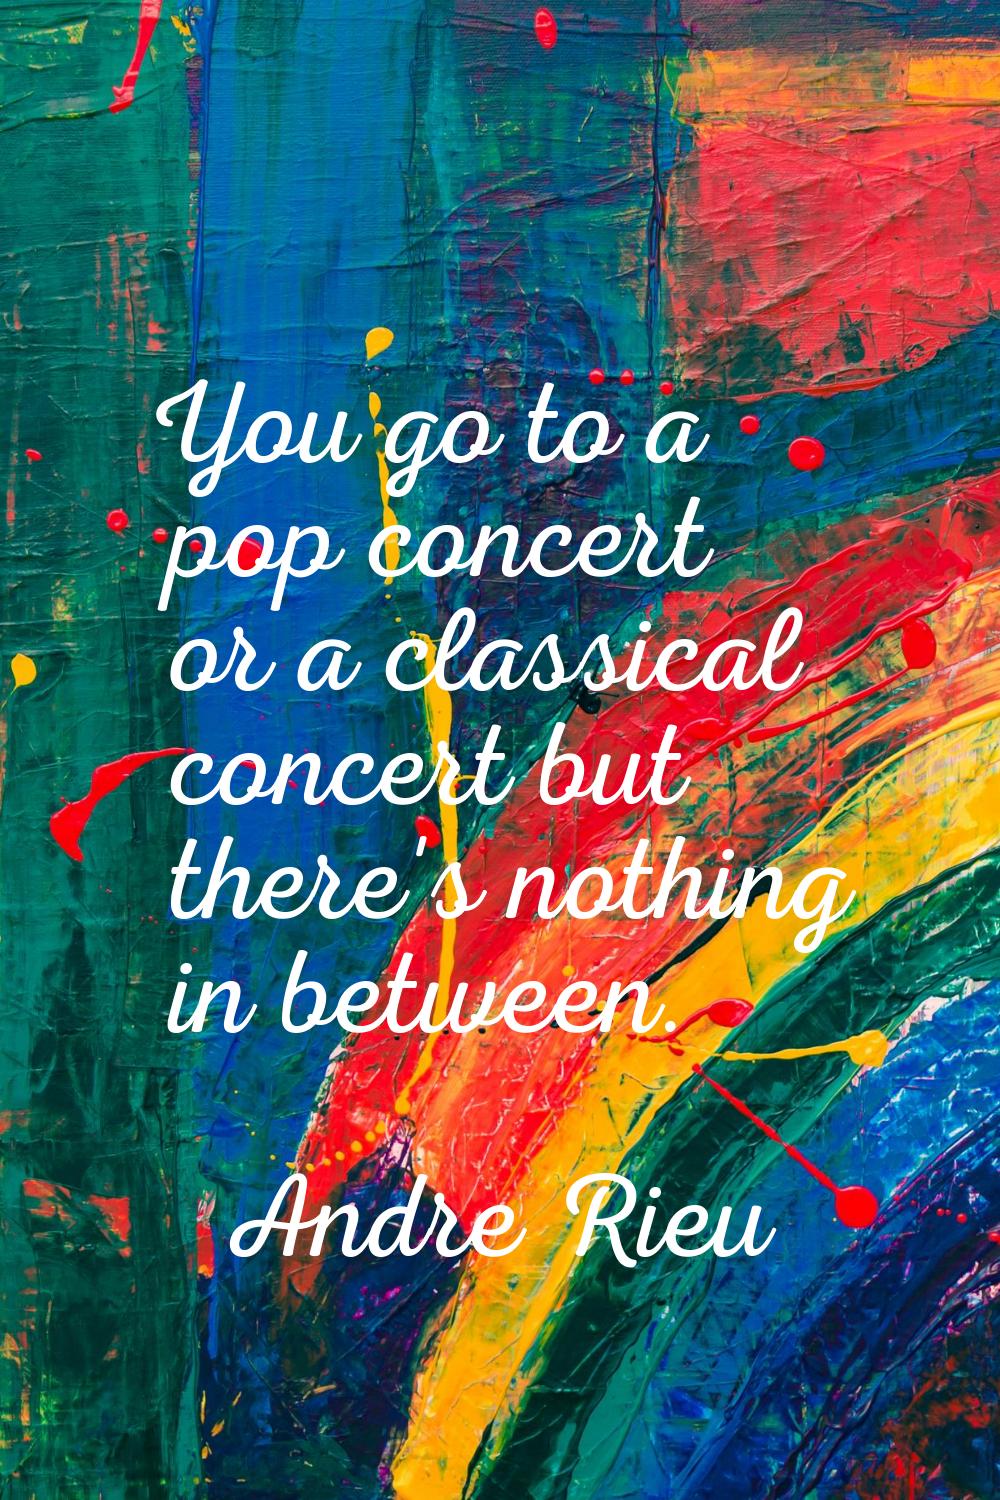 You go to a pop concert or a classical concert but there's nothing in between.